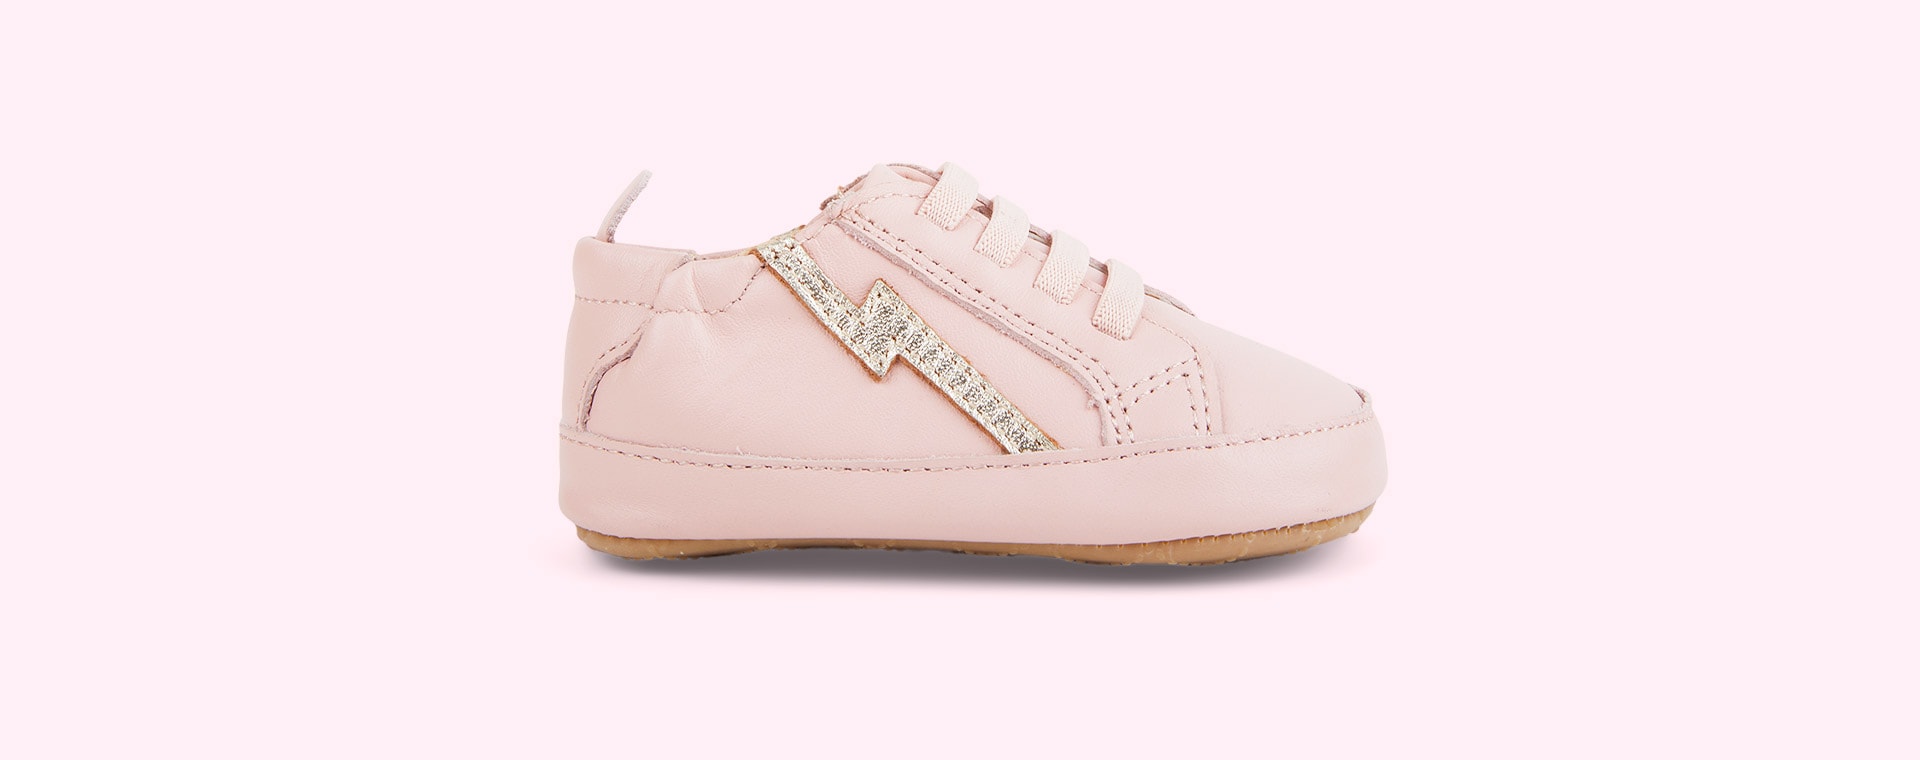 Powder Pink / Gold old soles Bolty Baby Sneakers